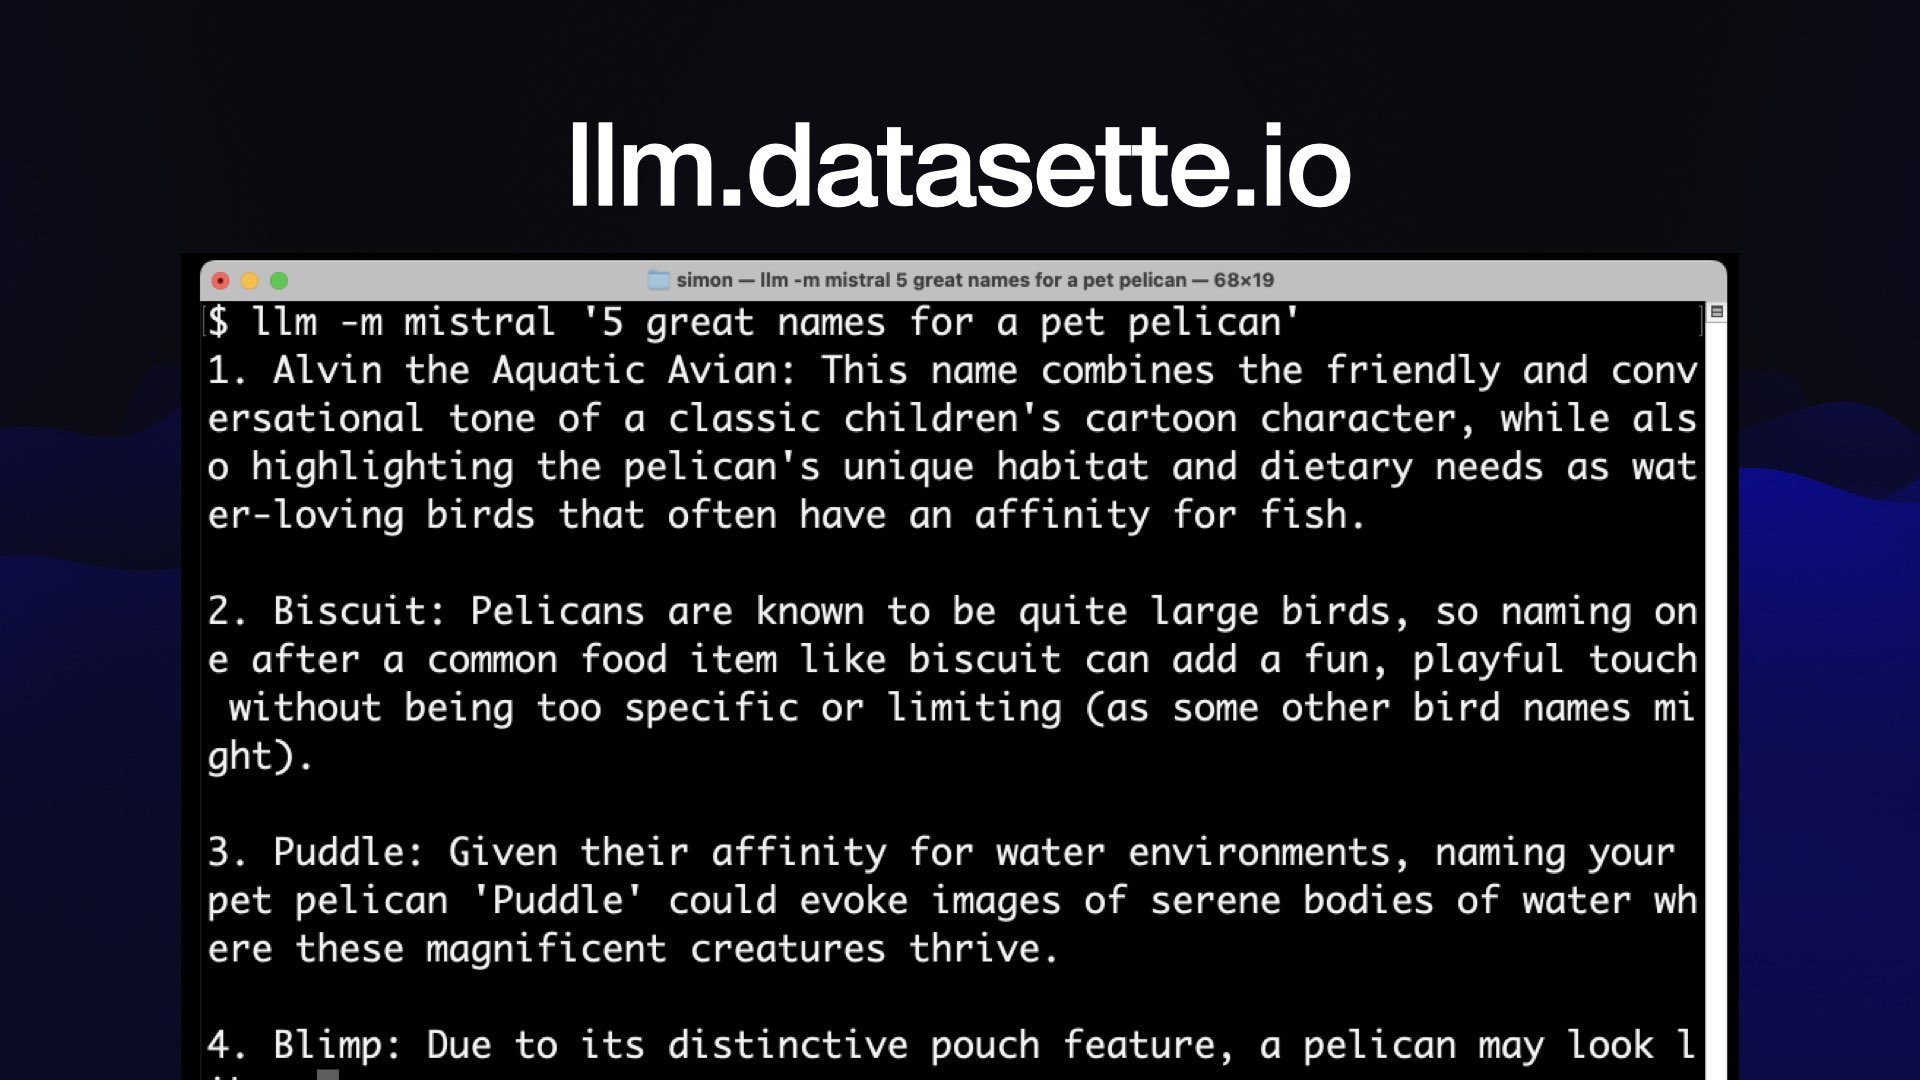 Ilm.datasette.io  Screenshot of a macOS terminal window:  $ llm -m mistral '5 great names for a pet pelican'  1. Alvin the Aquatic Avian: This name combines the friendly and conversational tone of a classic children's cartoon character, while als o highlighting the pelican's unique habitat and dietary needs as wat er-loving birds that often have an affinity for fish. 2. Biscuit: Pelicans are known to be quite large birds, so naming on e after a common food item like biscuit can add a fun, playful touch without being too specific or limiting (as some other bird names mi ght). 3. Puddle: Given their affinity for water environments, naming your pet pelican 'Puddle' could evoke images of serene bodies of water wh ere these magnificent creatures thrive. 4. Blimp: Due to its distinctive pouch feature, a pelican may look